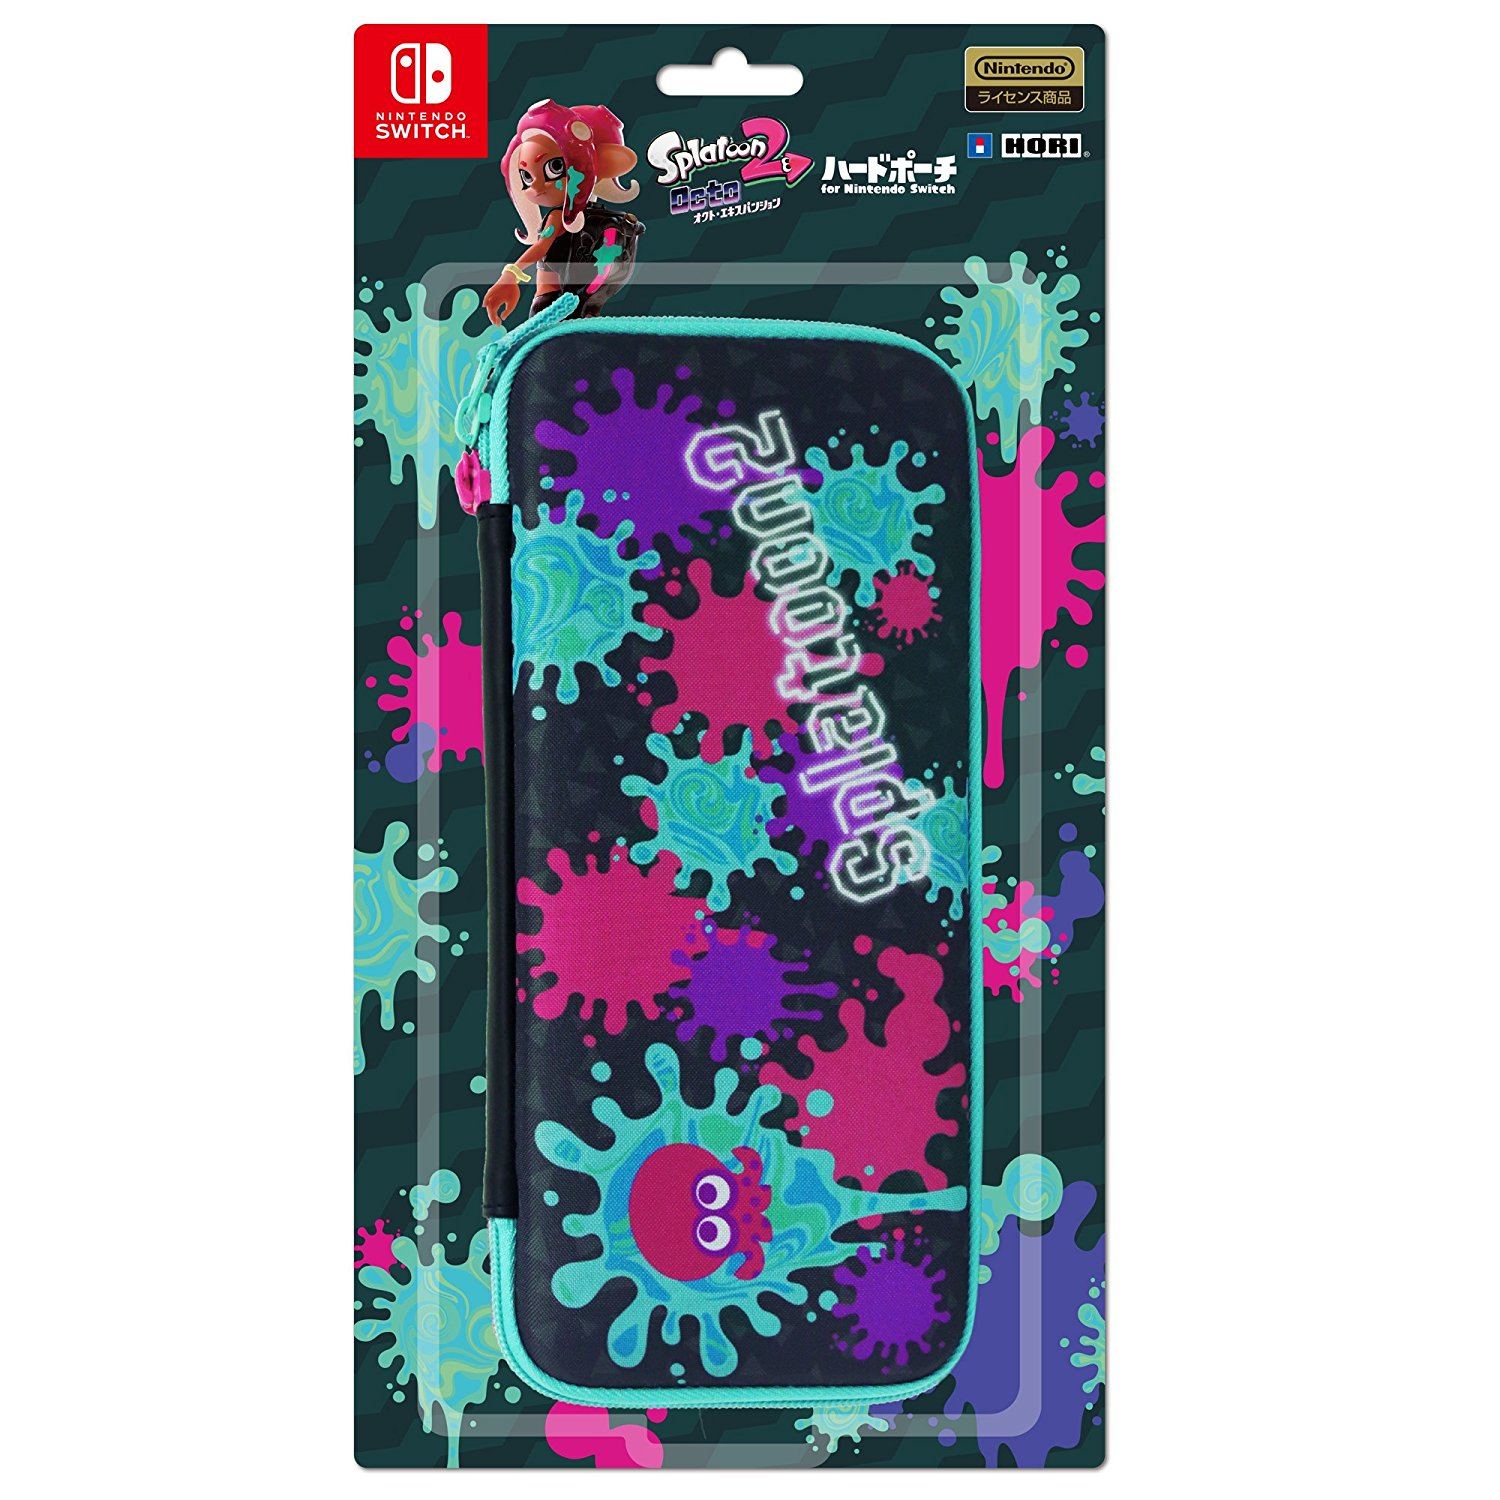 Splatoon 2 Hard Pouch for Nintendo Switch (Inkling Squid) for Nintendo  Switch